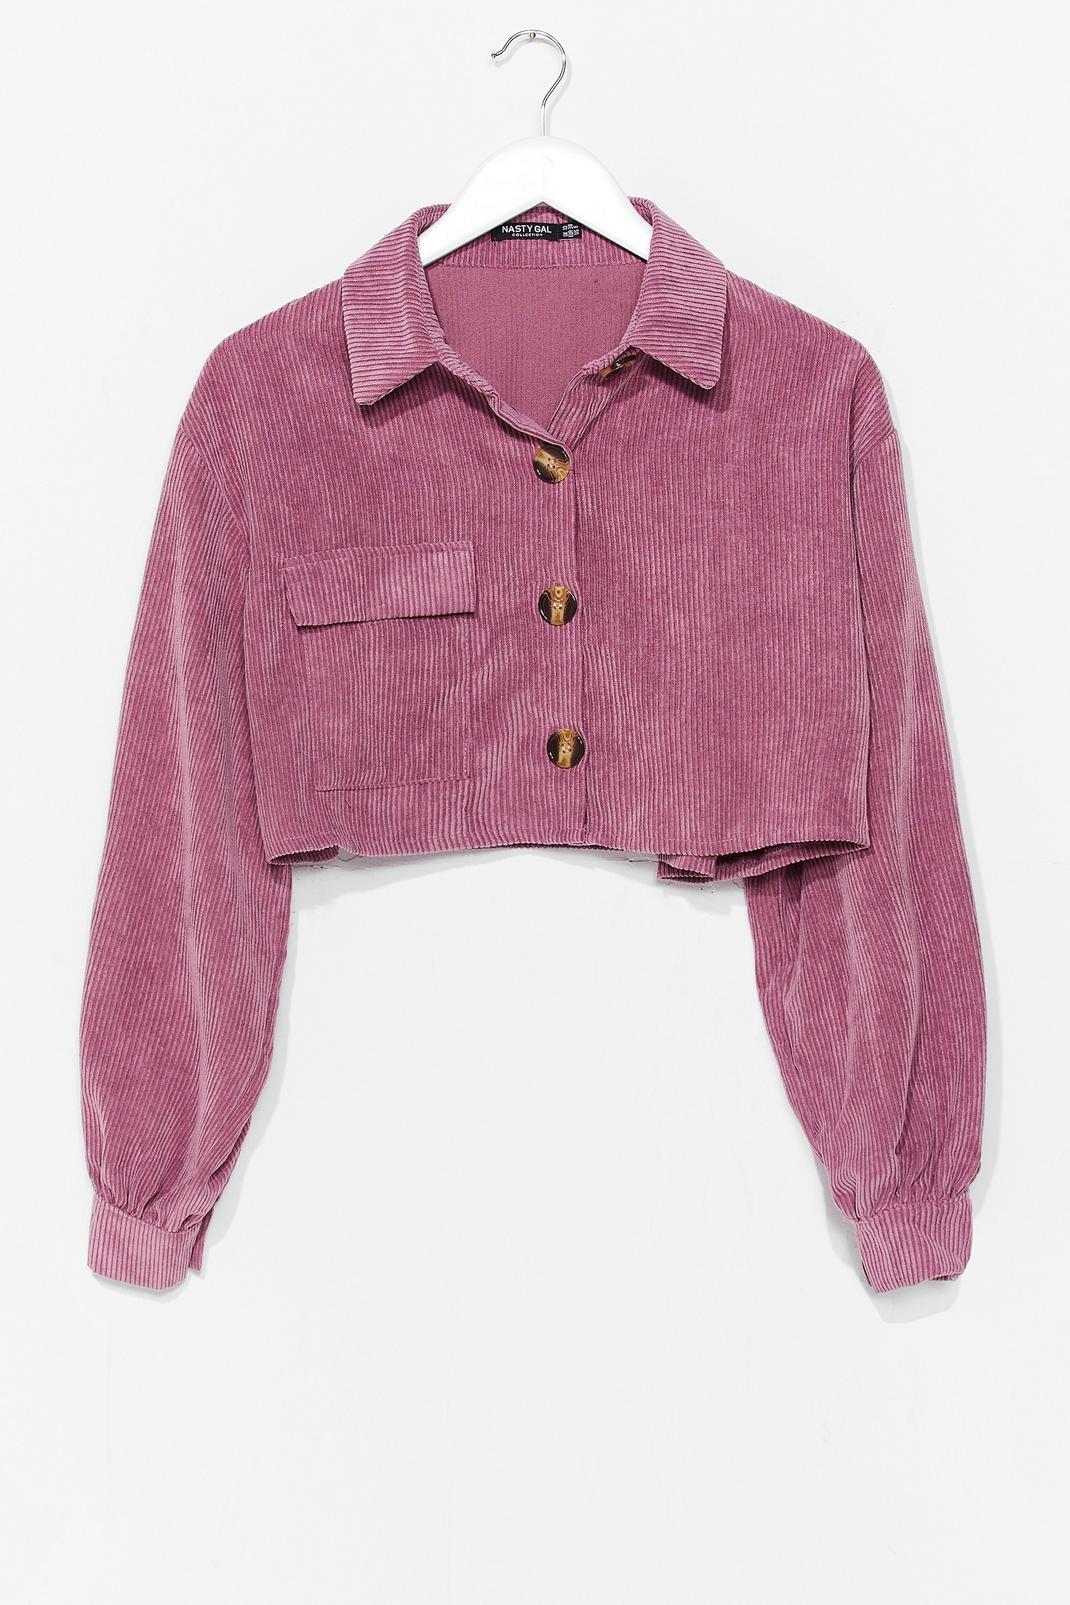 Mauve Play the Record-uroy Cropped Shirt image number 1